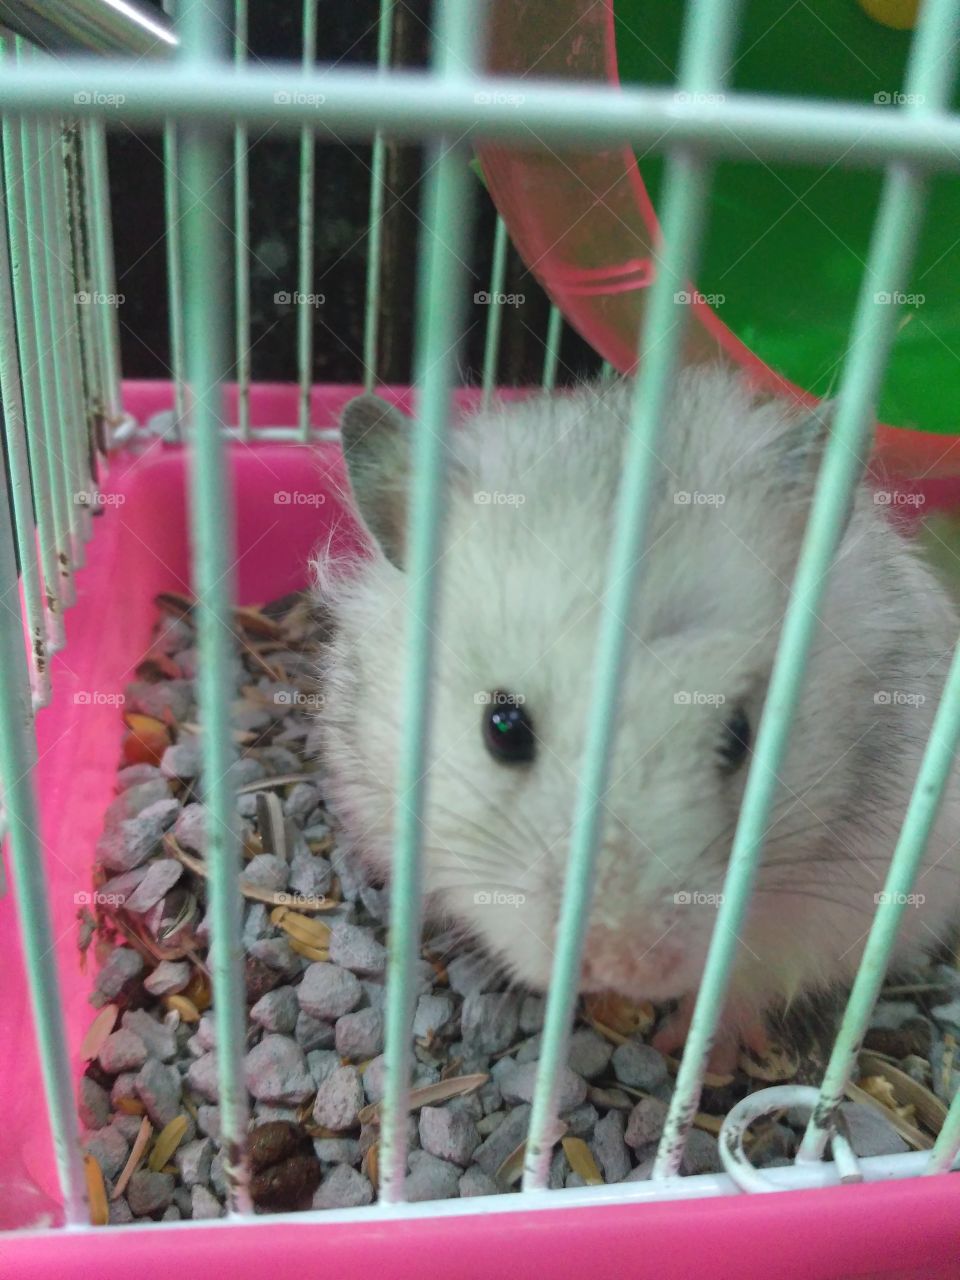 Hamster is animal in a family of a rodent.. is have a four leg and a tail with fur and a small body. they usually became a animal pet to people.. 